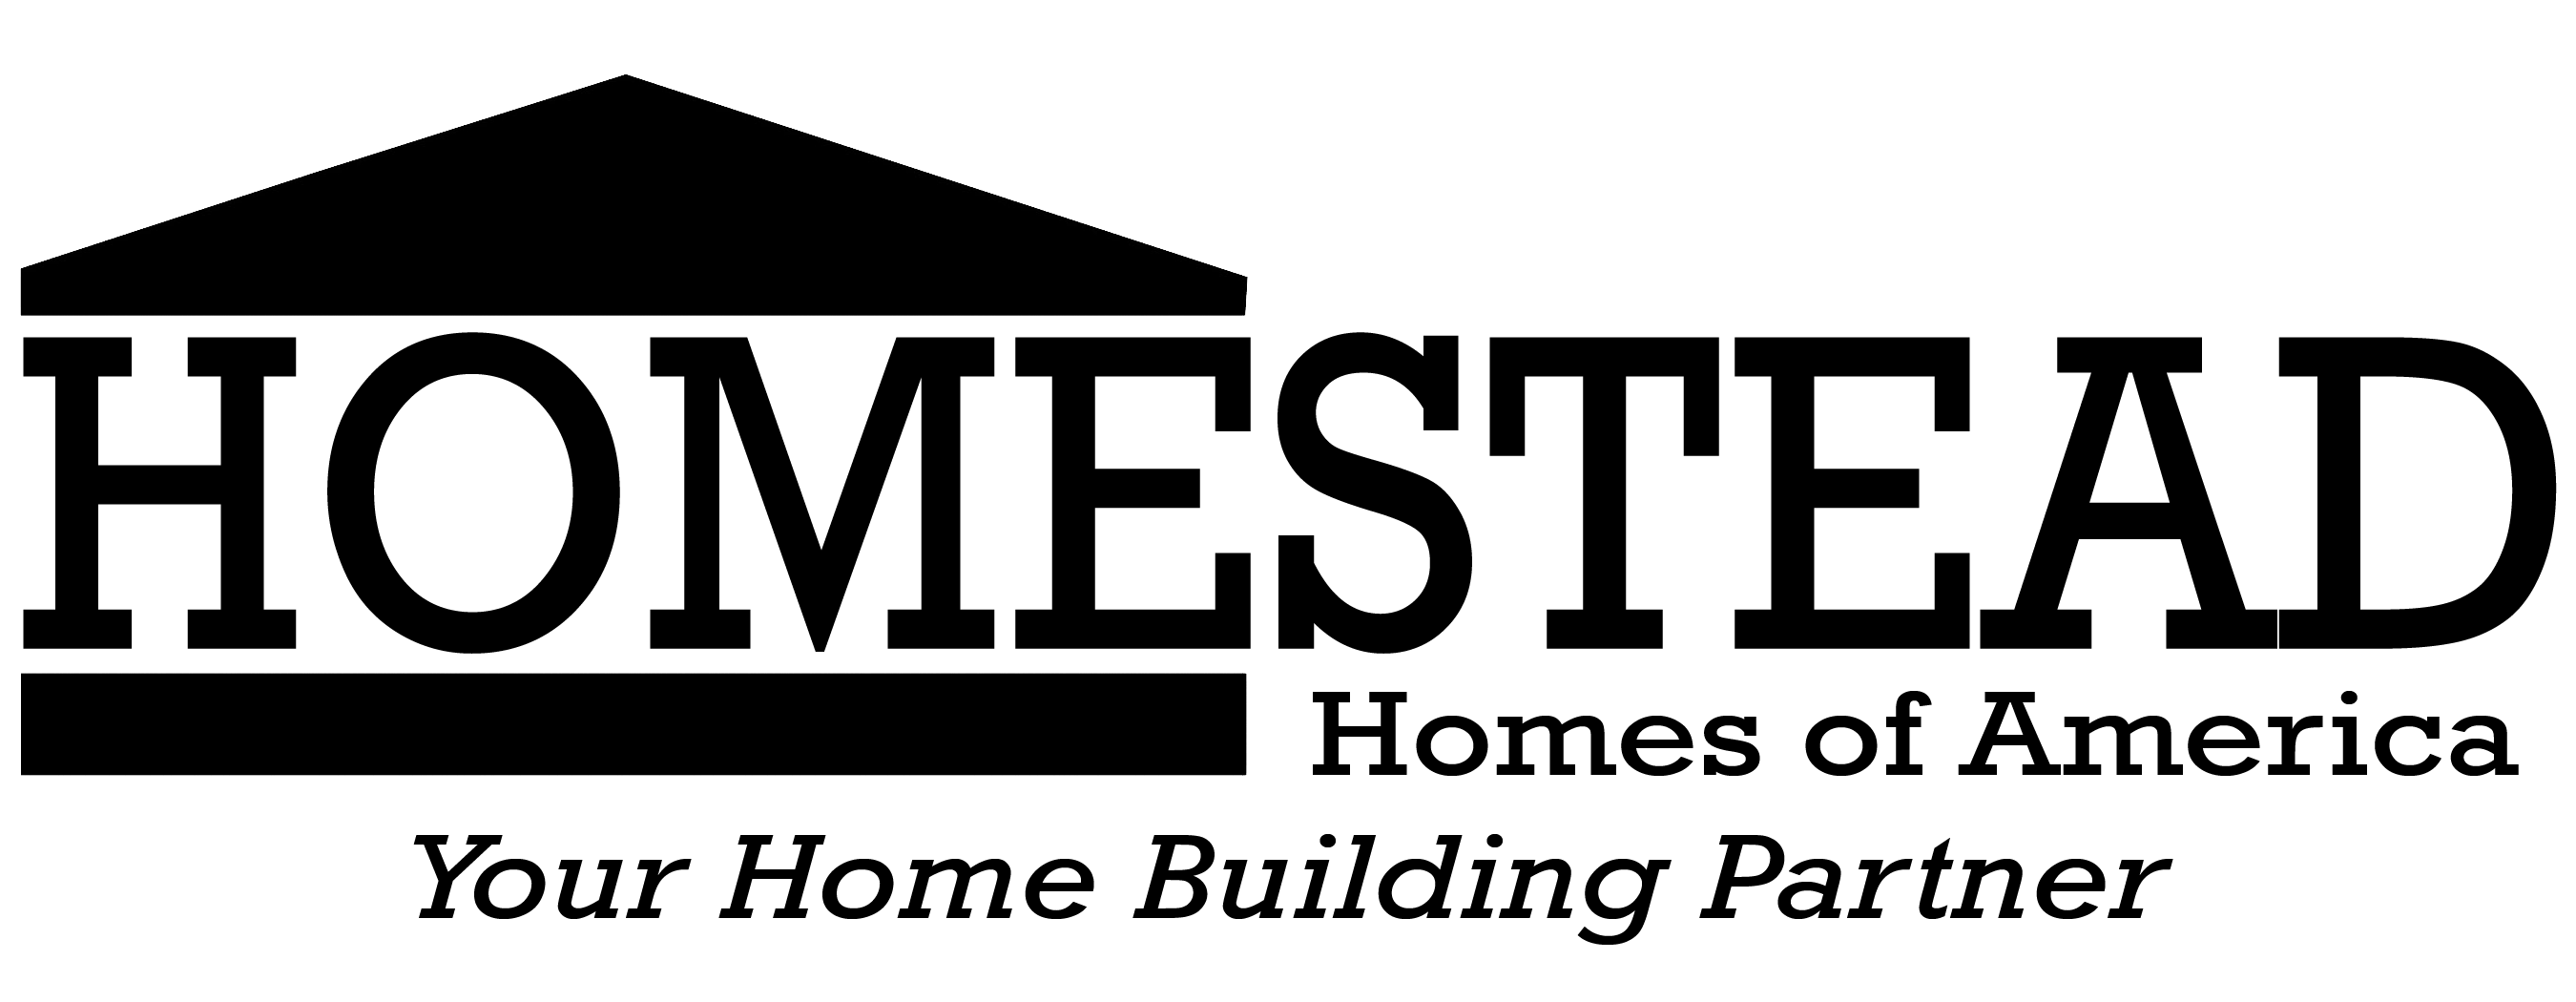 Homesteader Logo - Build Your Own Home Yourself | Best Homestead House Plans